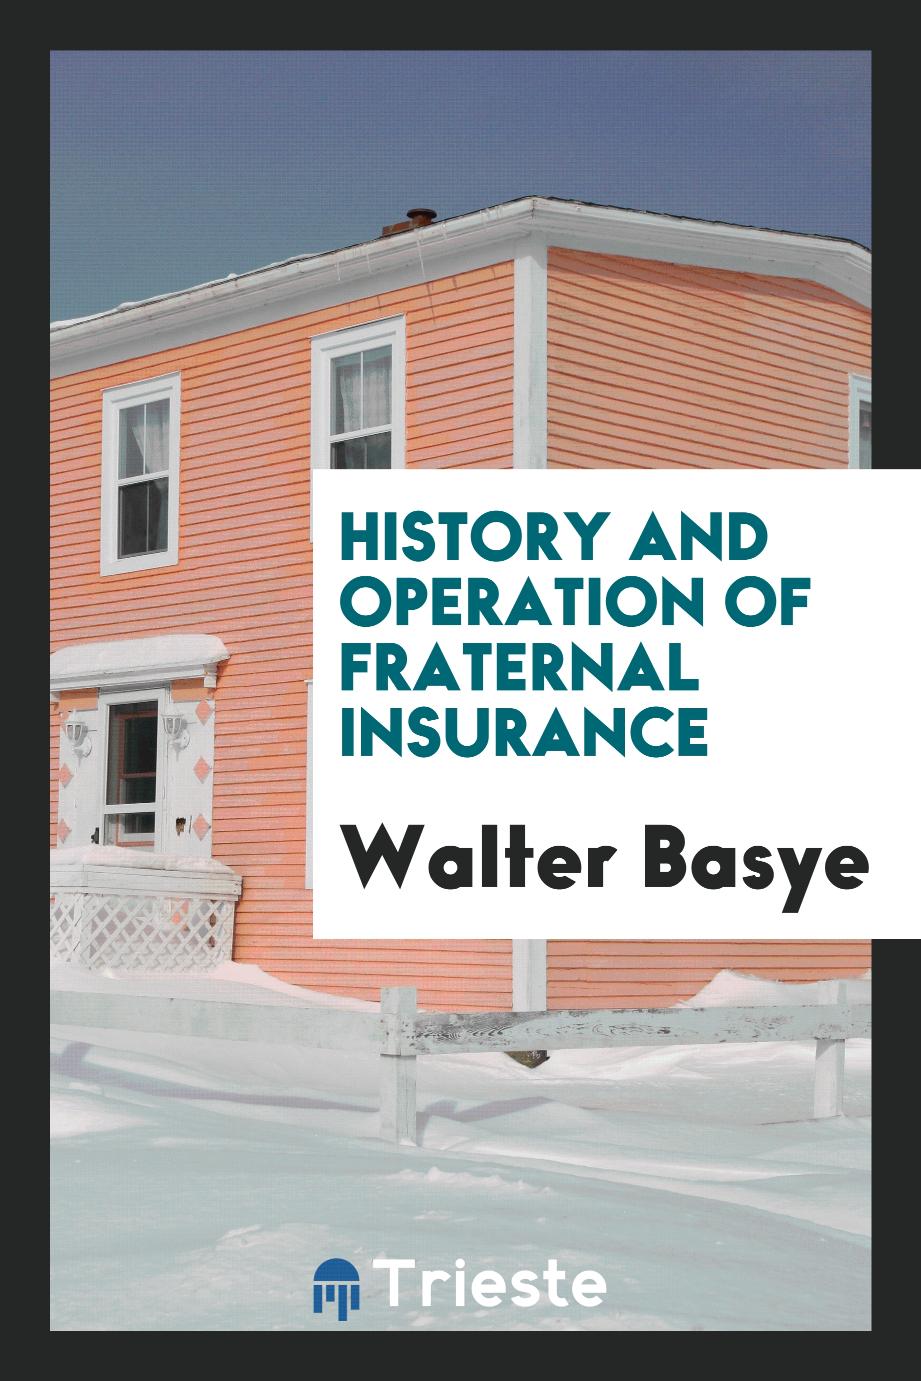 History and operation of fraternal insurance